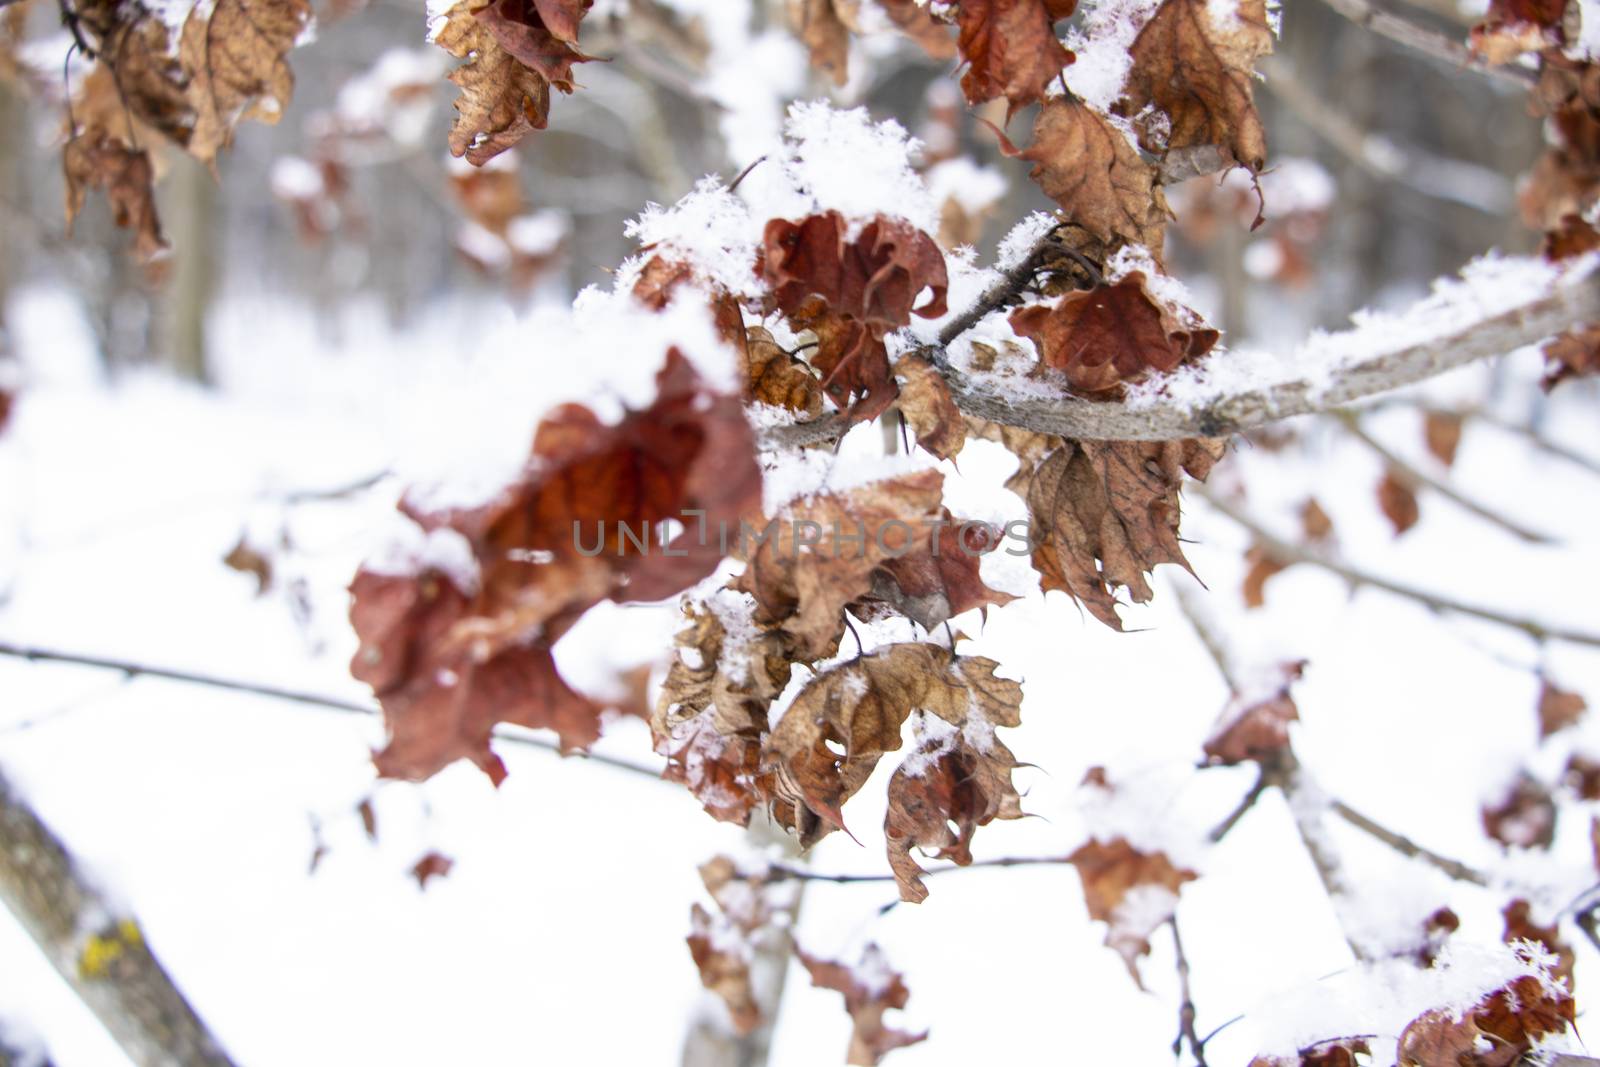 Beech tree leaf covered with snow. Fresh snow on withered leaves. Season winter